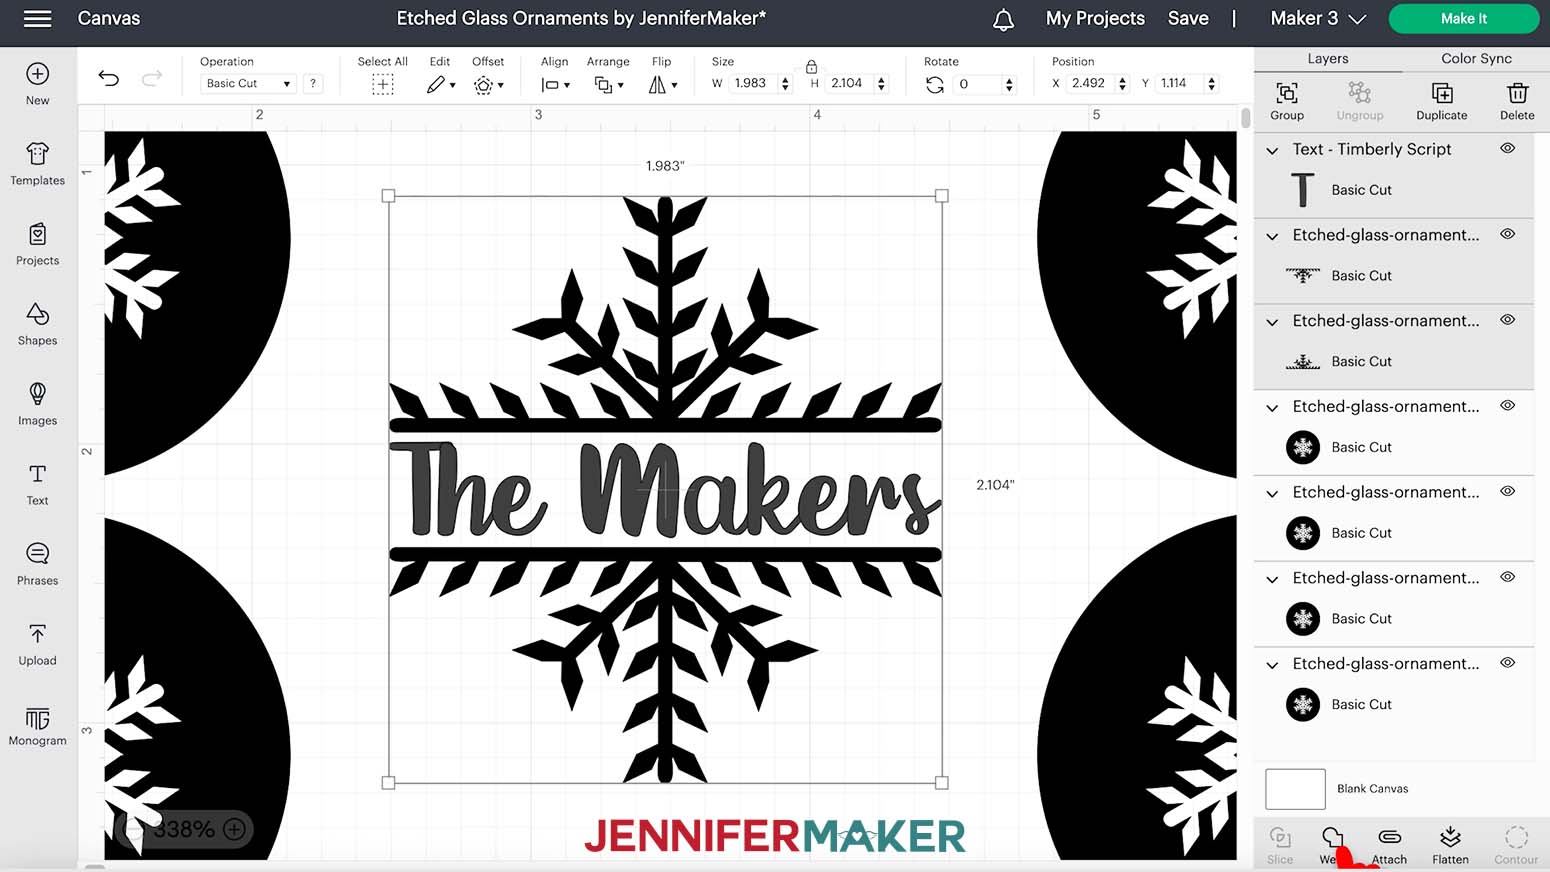 A screenshot of the Cricut Design Space canvas showing the words The Makers added to the center of the etched glass ornaments snowflake design. The three layers for the snowflake top, snowflake bottom, and text are selected in the layers panel.